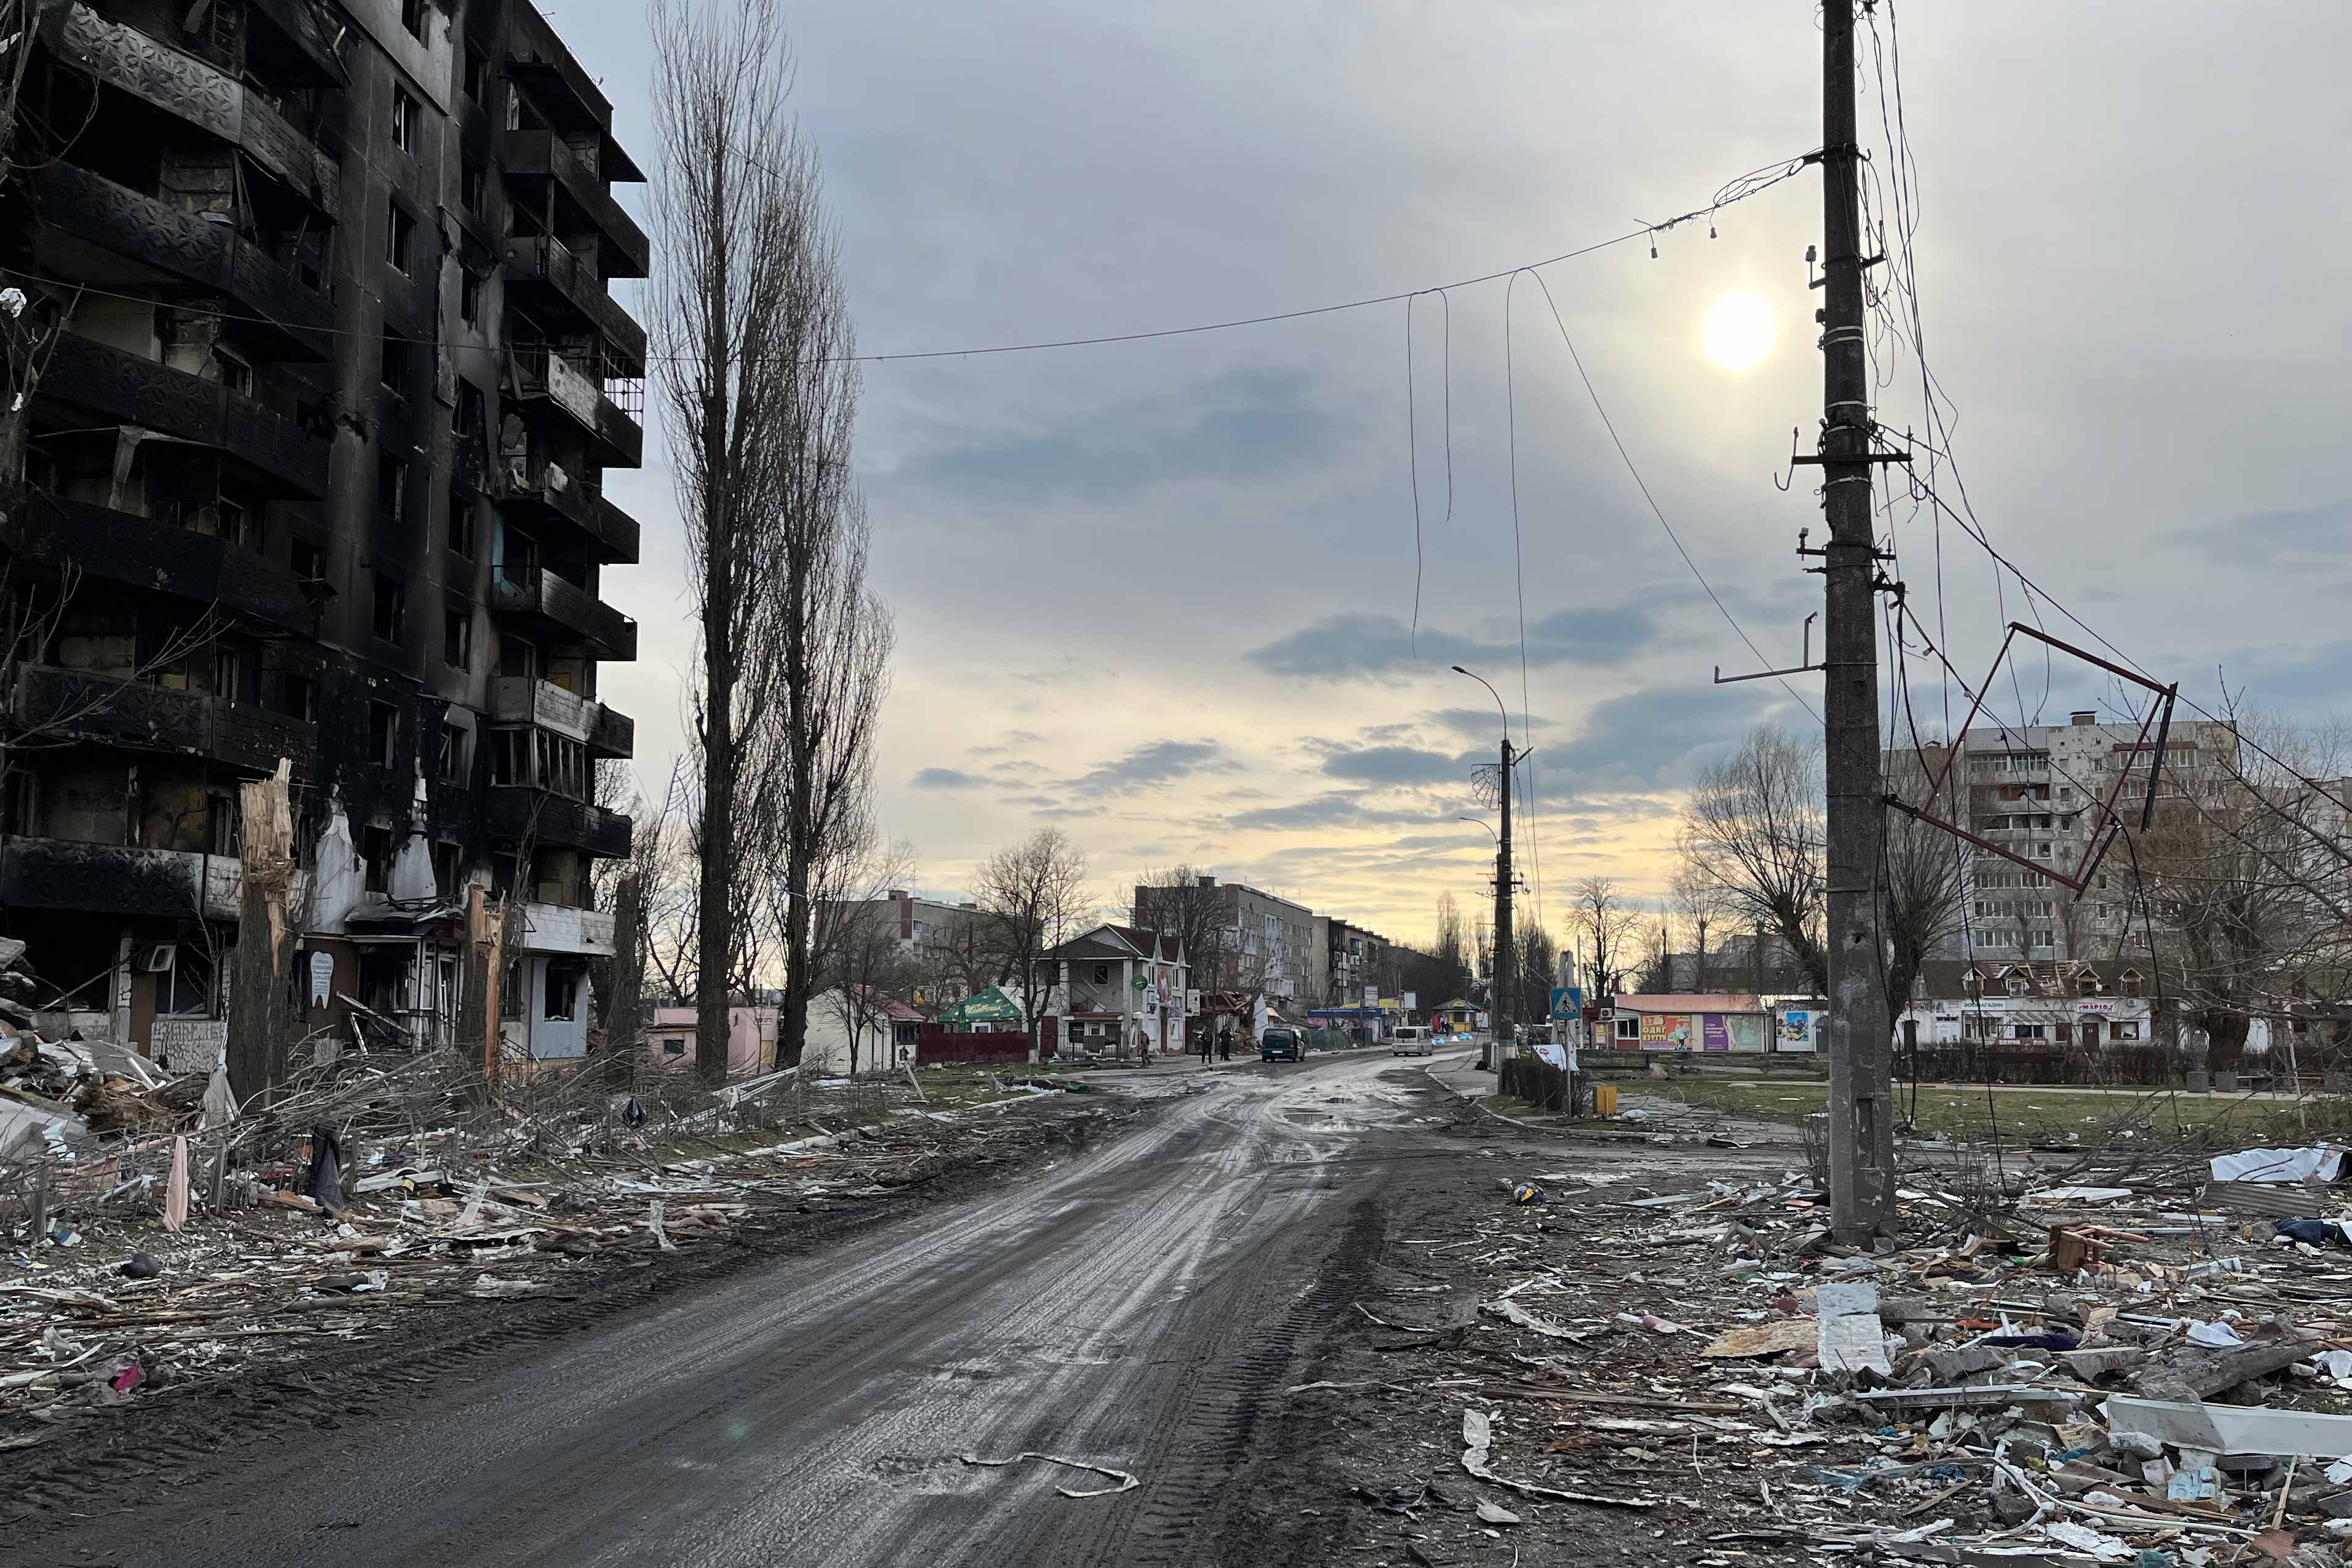 Borodyanka, a settlement in the Kyiv Oblast has endured heavy bombardment by the Russian forces. © IWPR